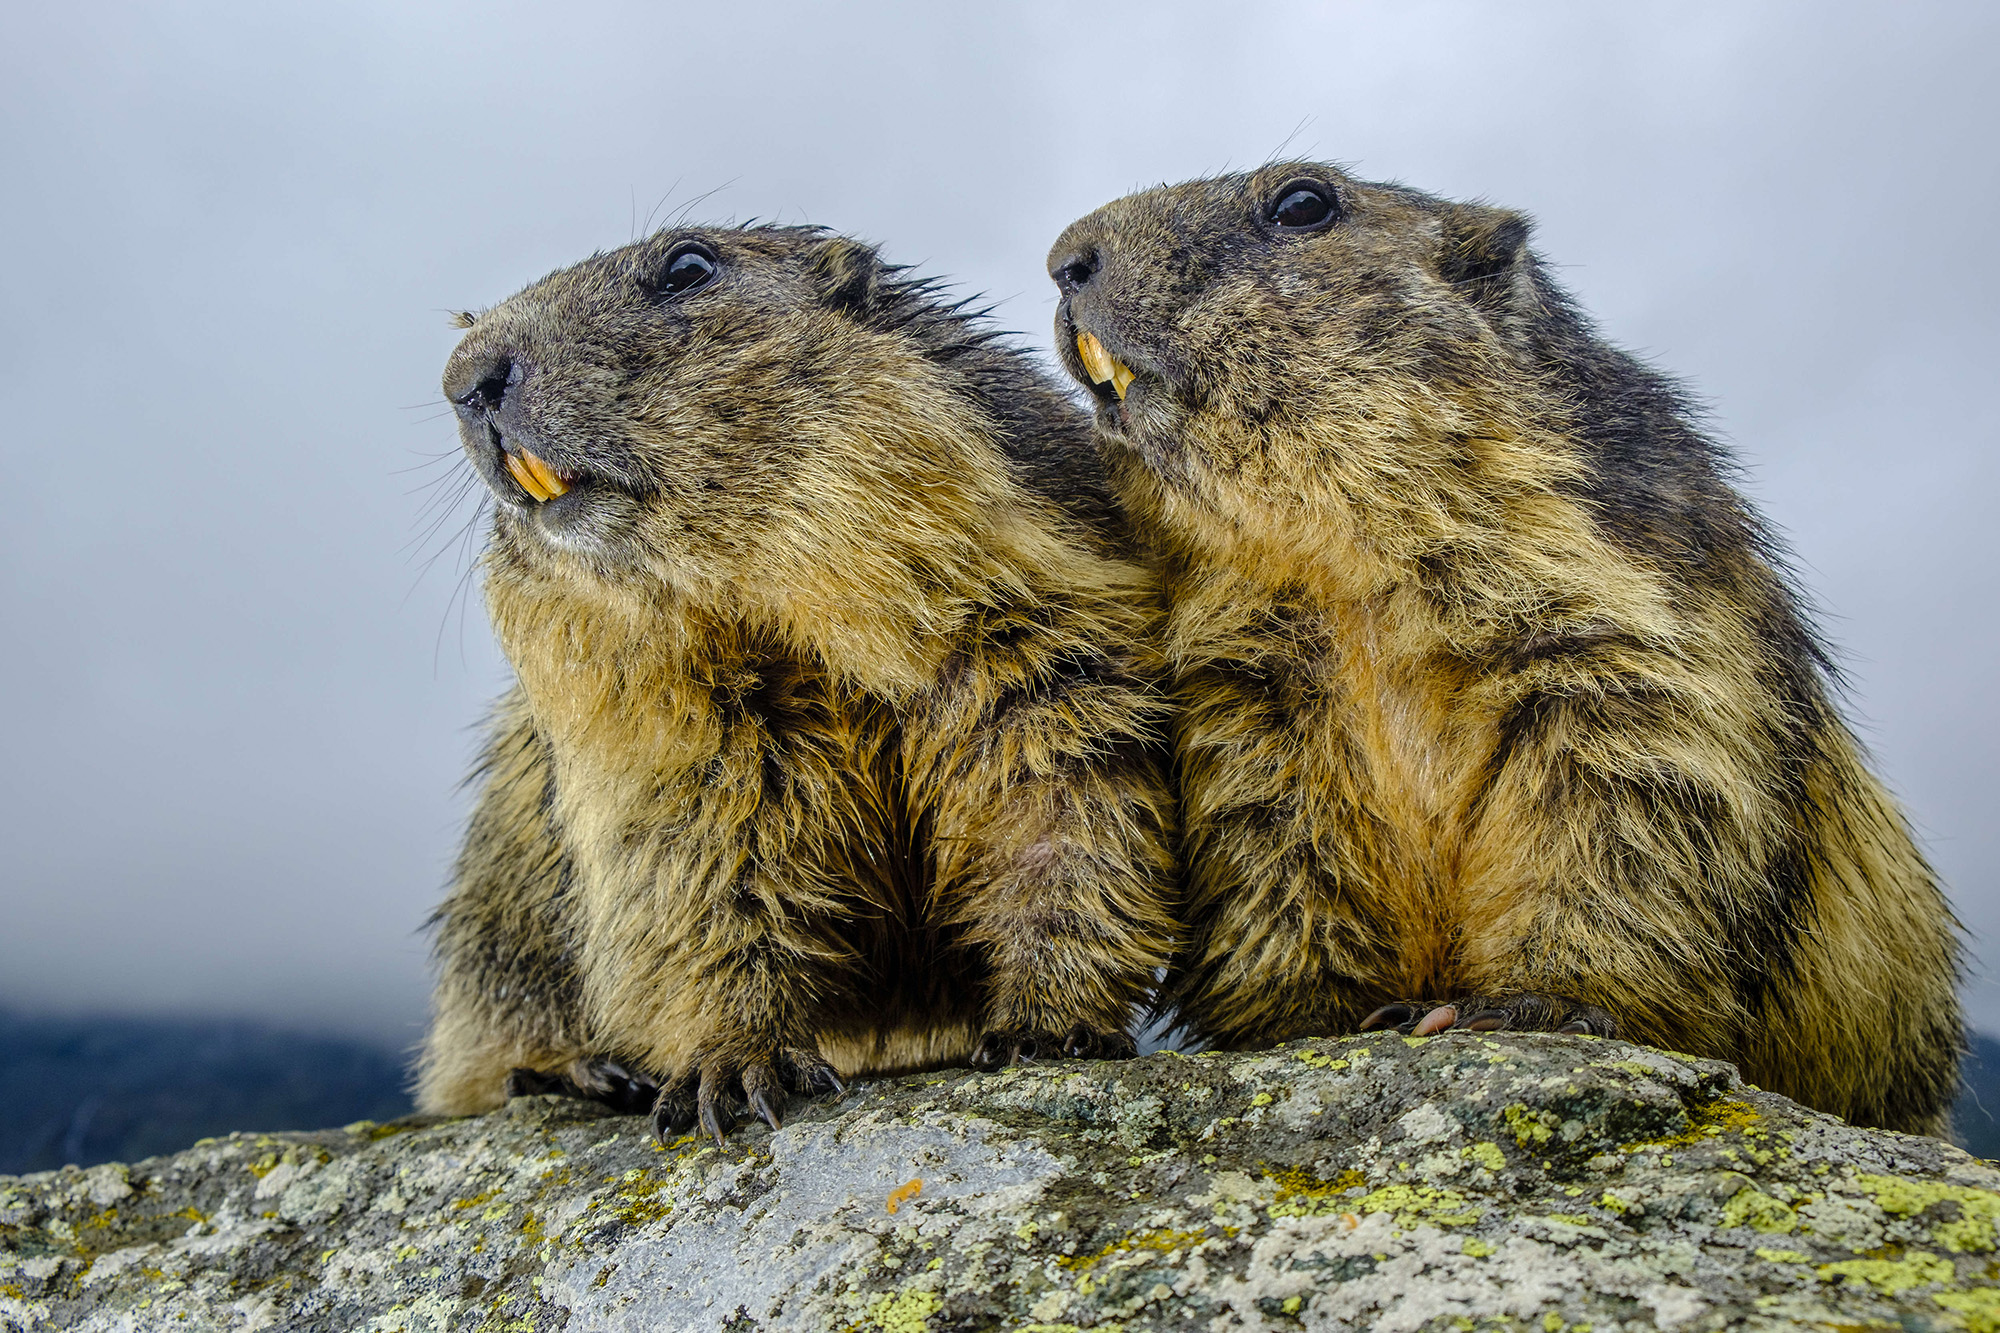 Groundhog Day 2018 Results Are Very Different | Time